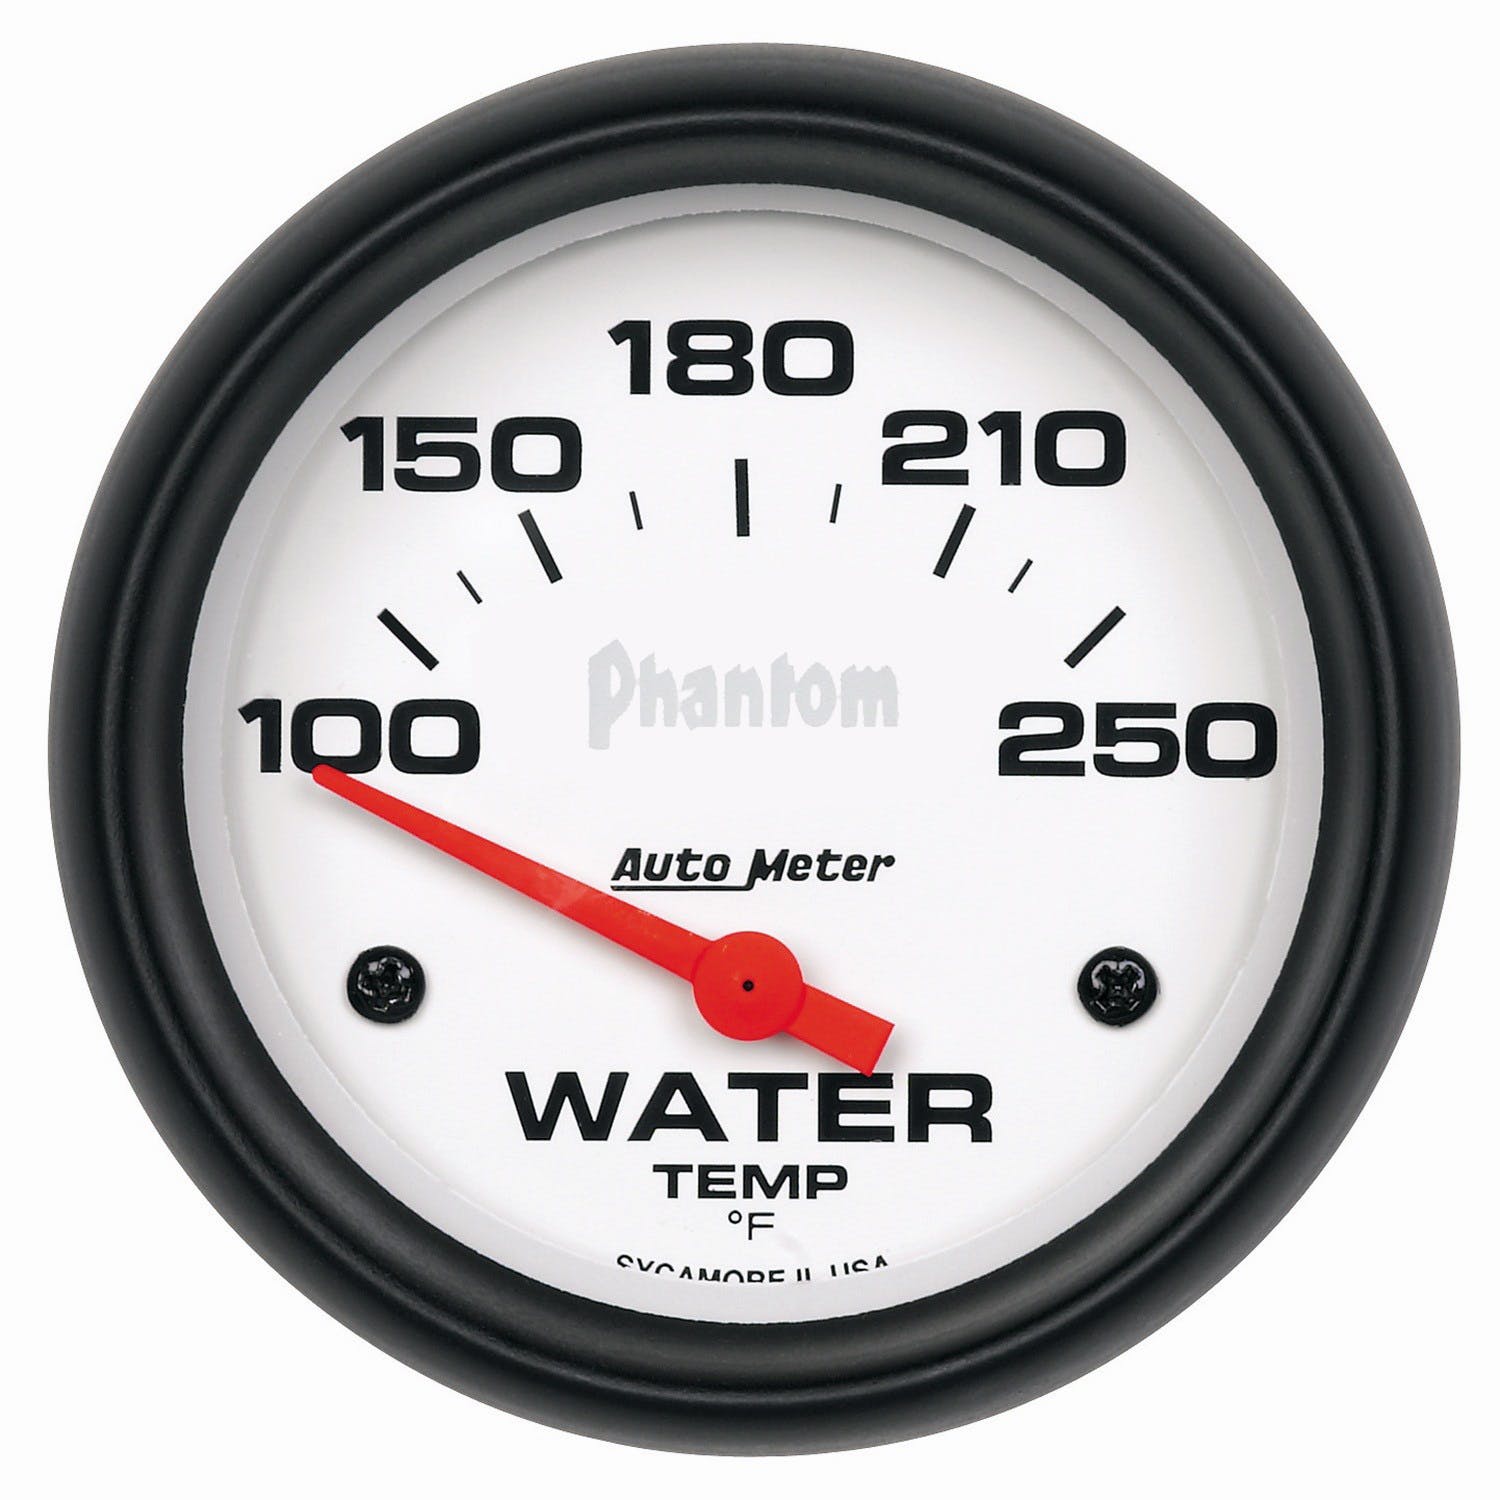 AutoMeter Products 5837 Water Temp 100-250 F